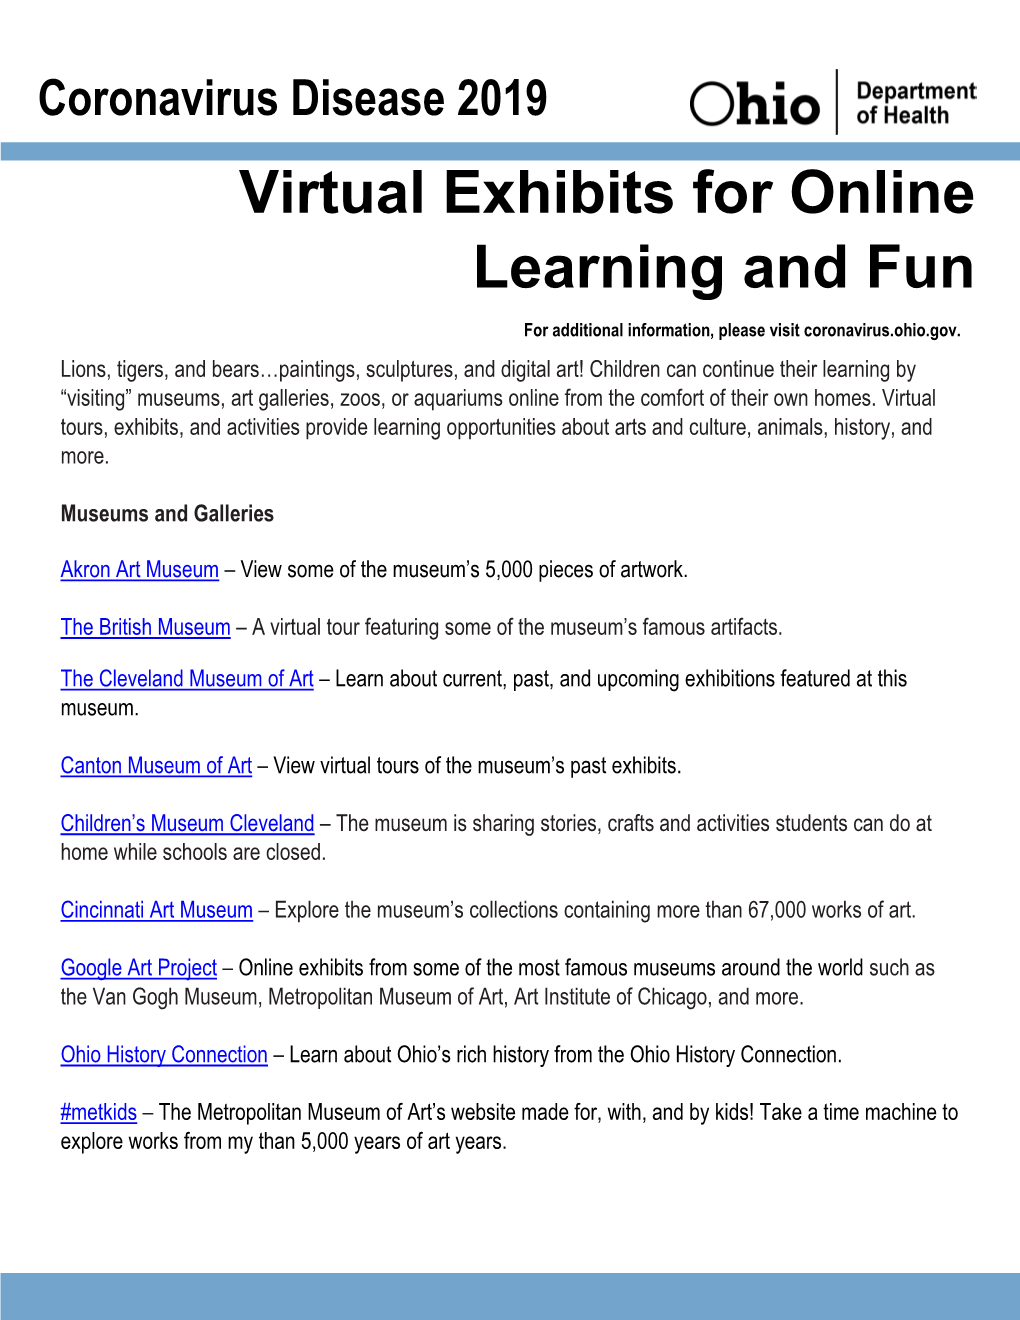 Virtual Exhibits for Online Learning and Fun